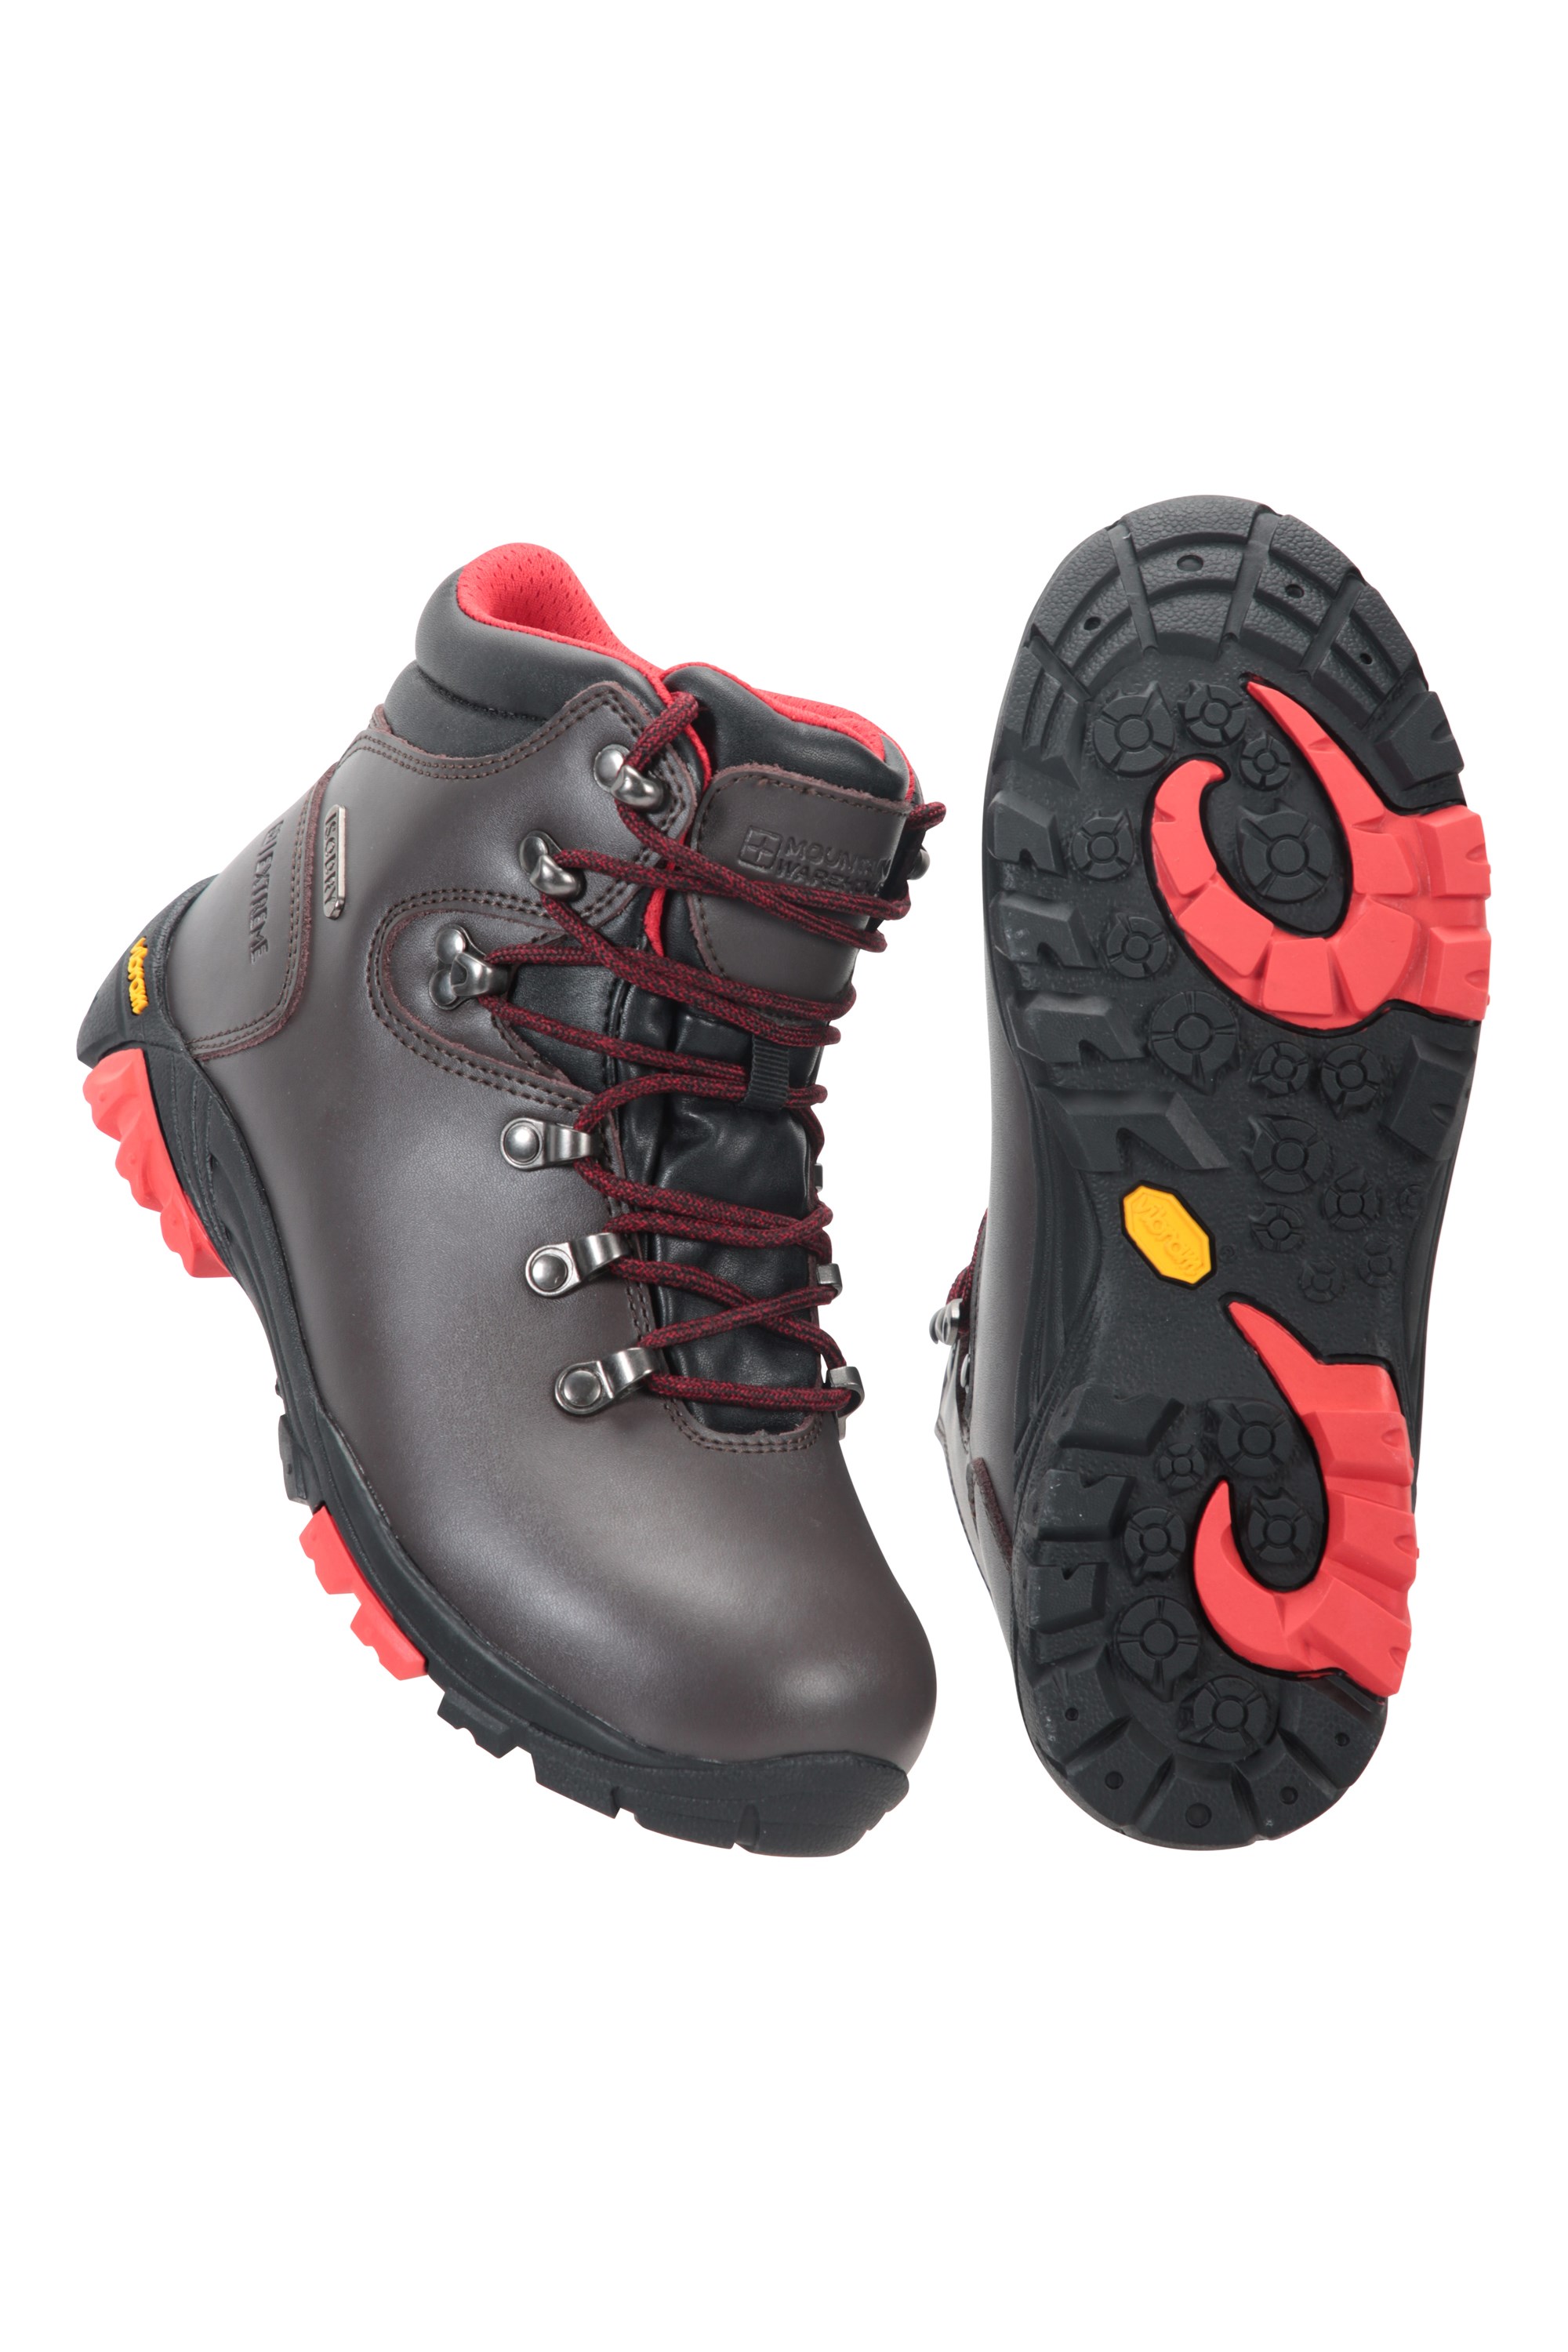 Extreme Latitude Kids Waterproof Leather Vibram Boots - Brown